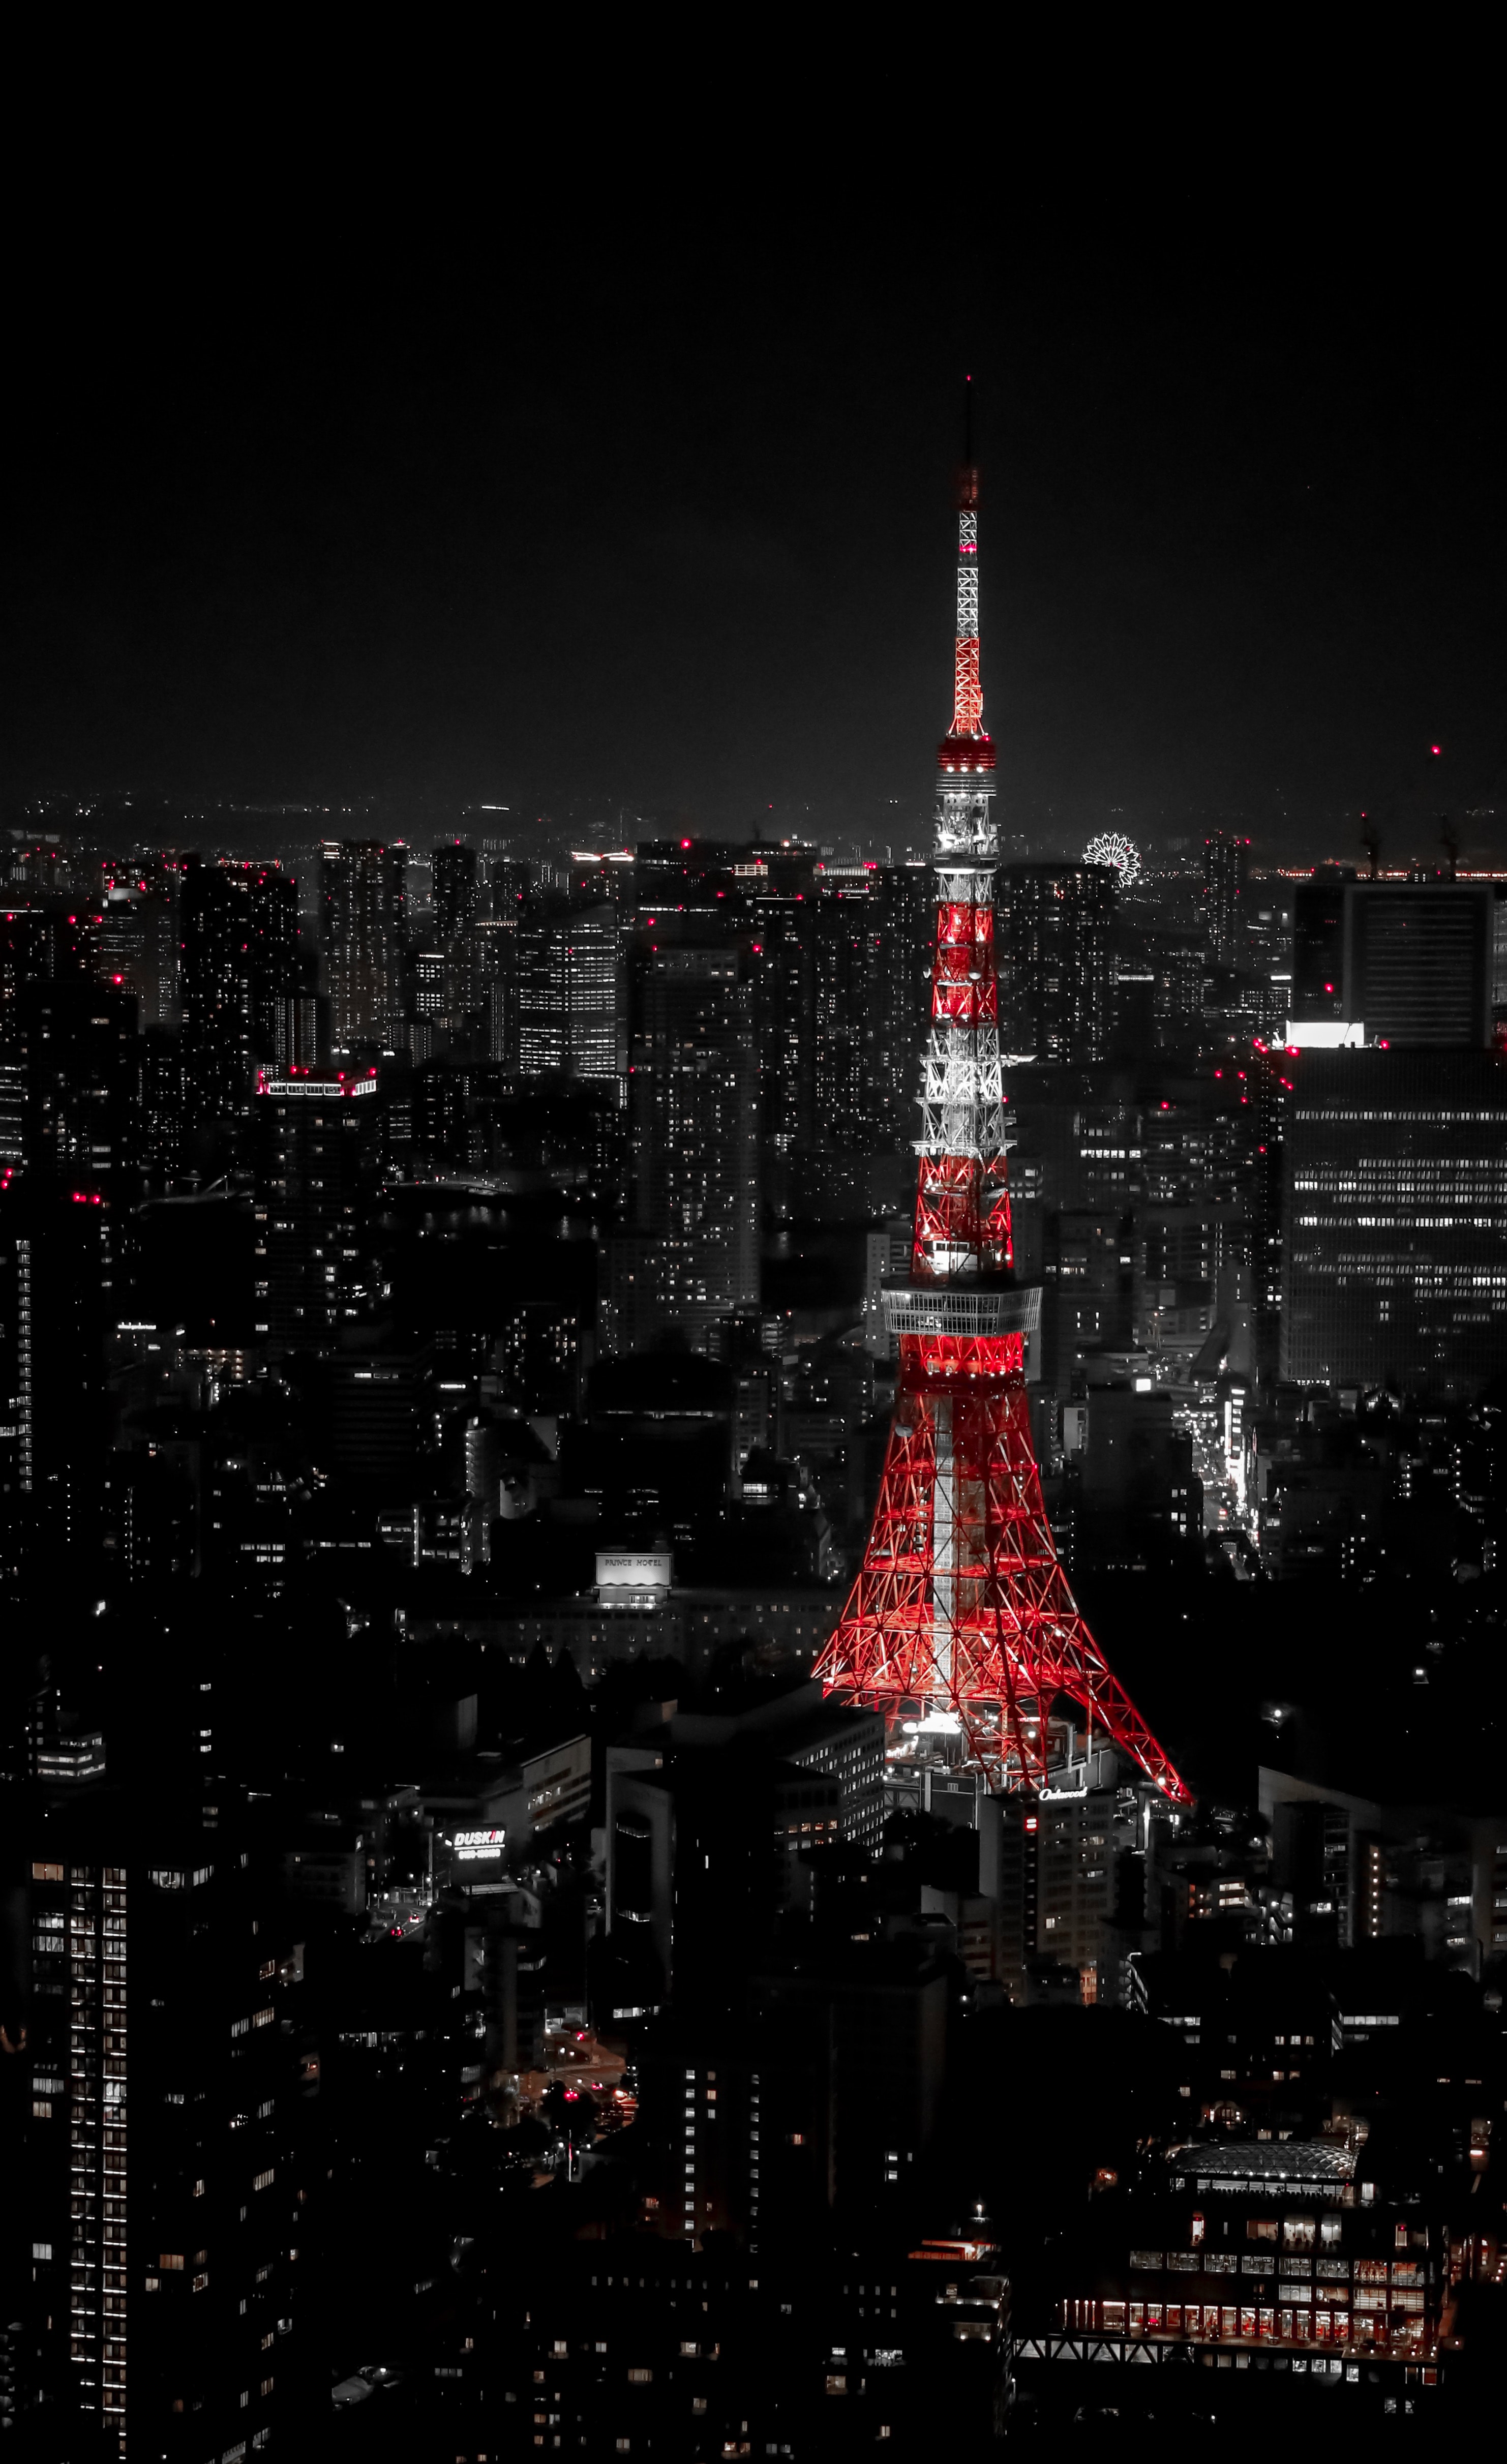 vertical wallpaper dark, night city, tower, cities, architecture, building, view from above